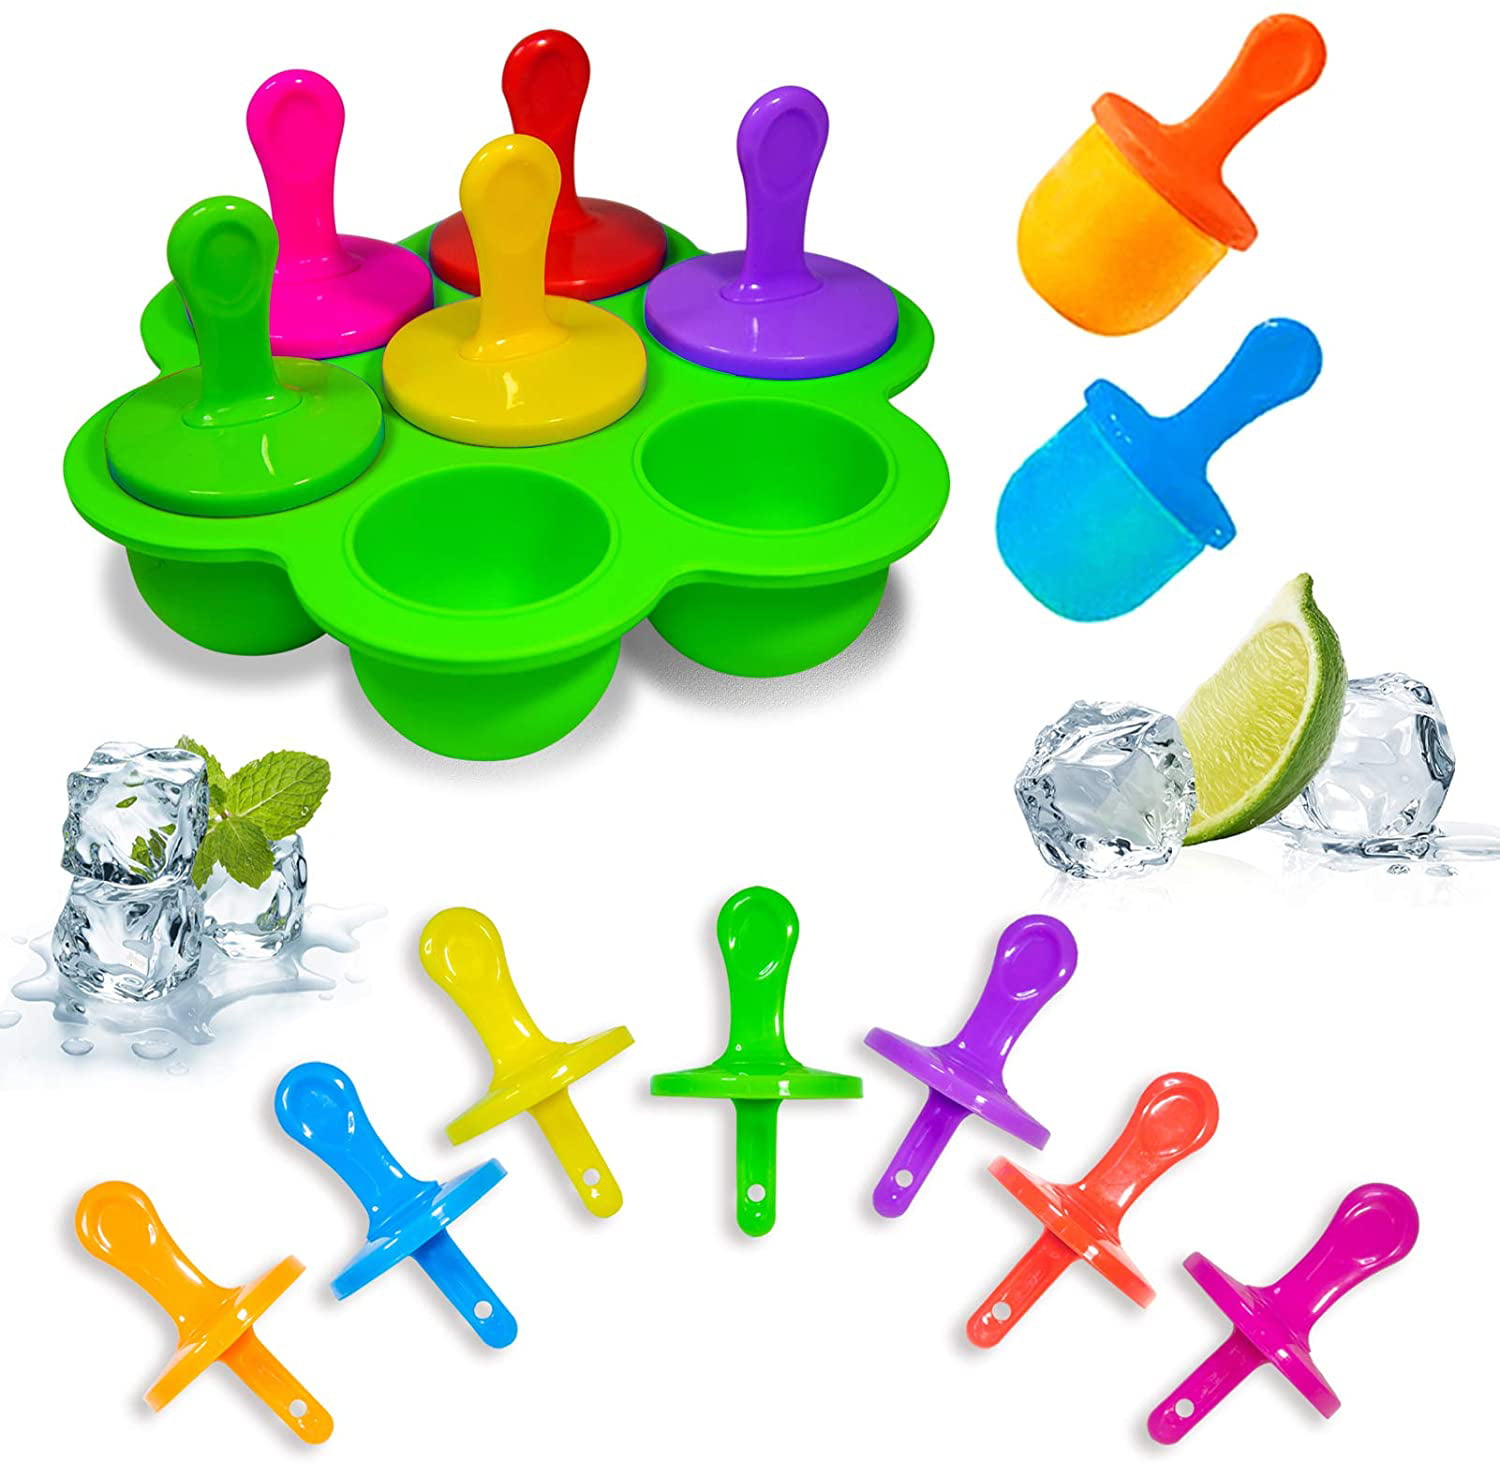 Mini Silicone Popsicle Mold with 7-Cavity DIY Non-Stick Ice Pop Molds ...